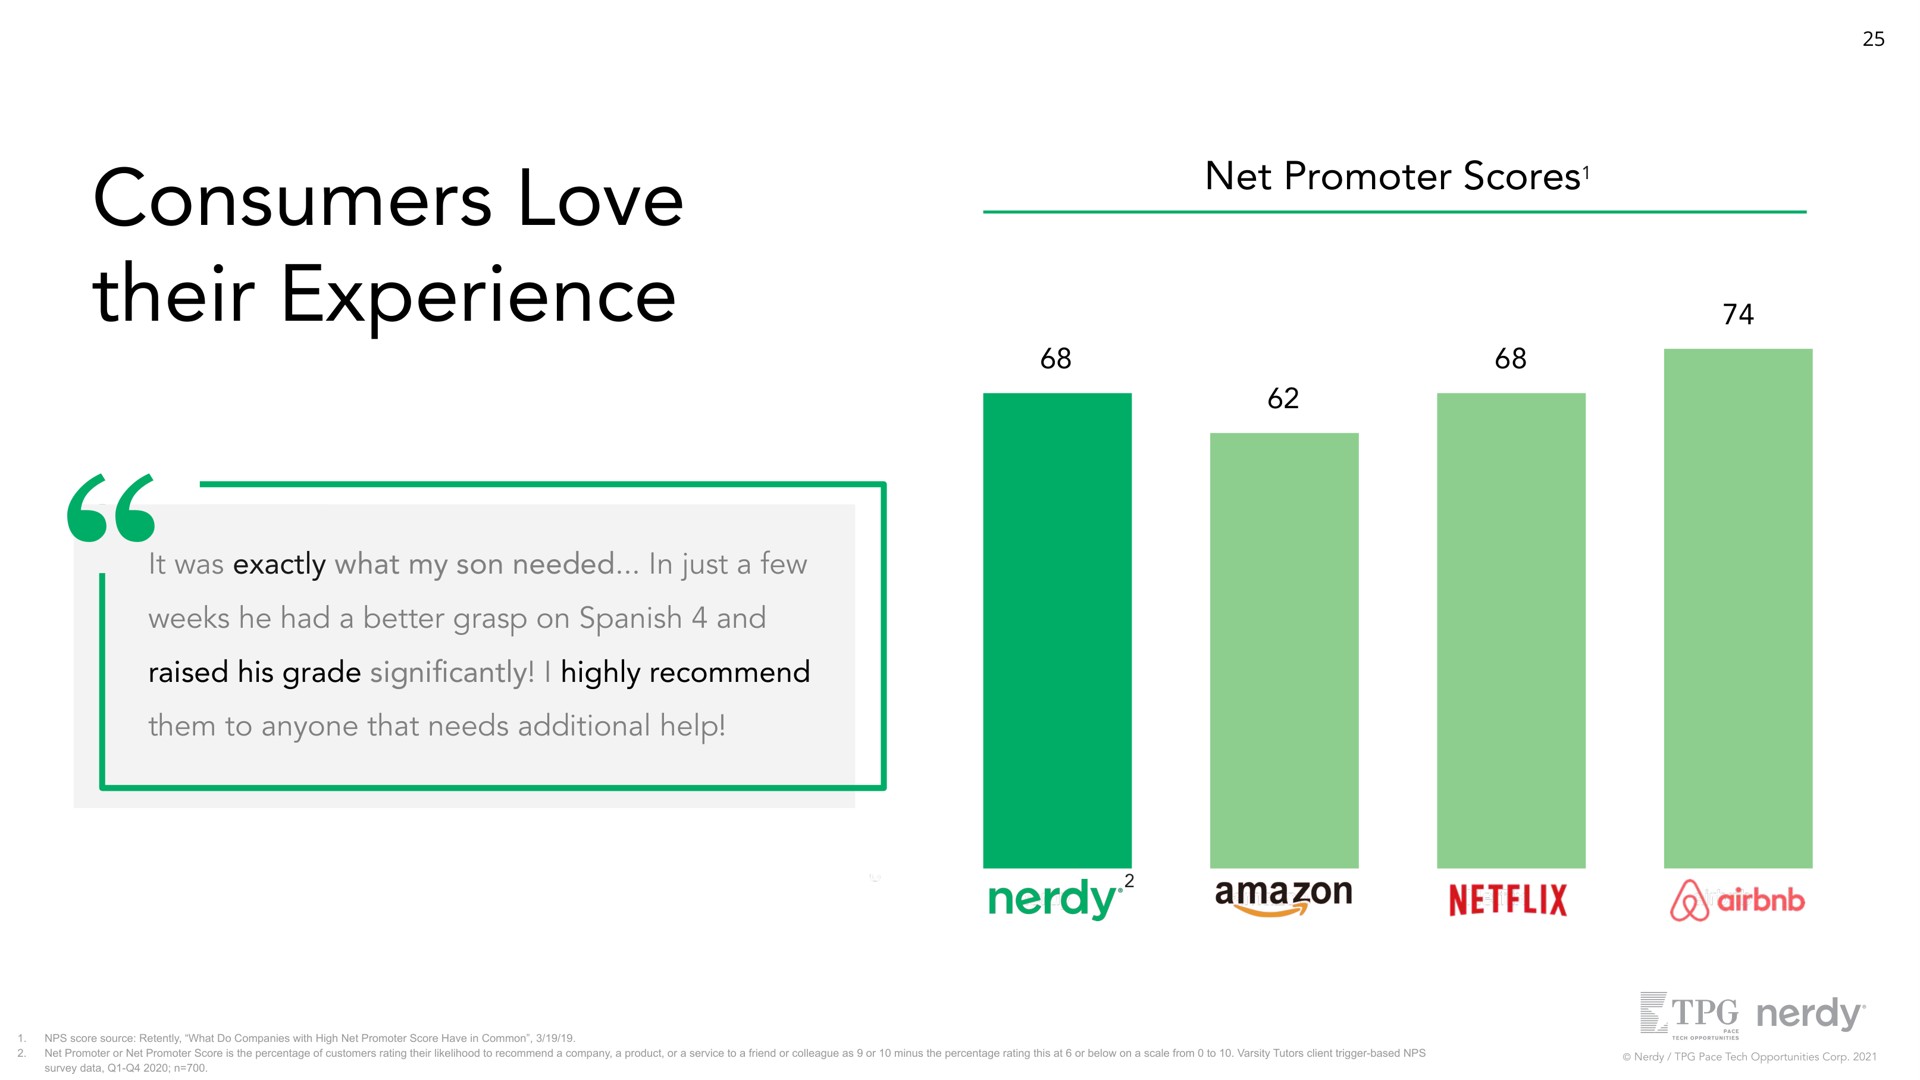 consumers love their experience net promoter scores it was exactly what my son needed in just a few weeks he had a better grasp on and raised his grade i highly recommend them to anyone that needs additional help | Nerdy